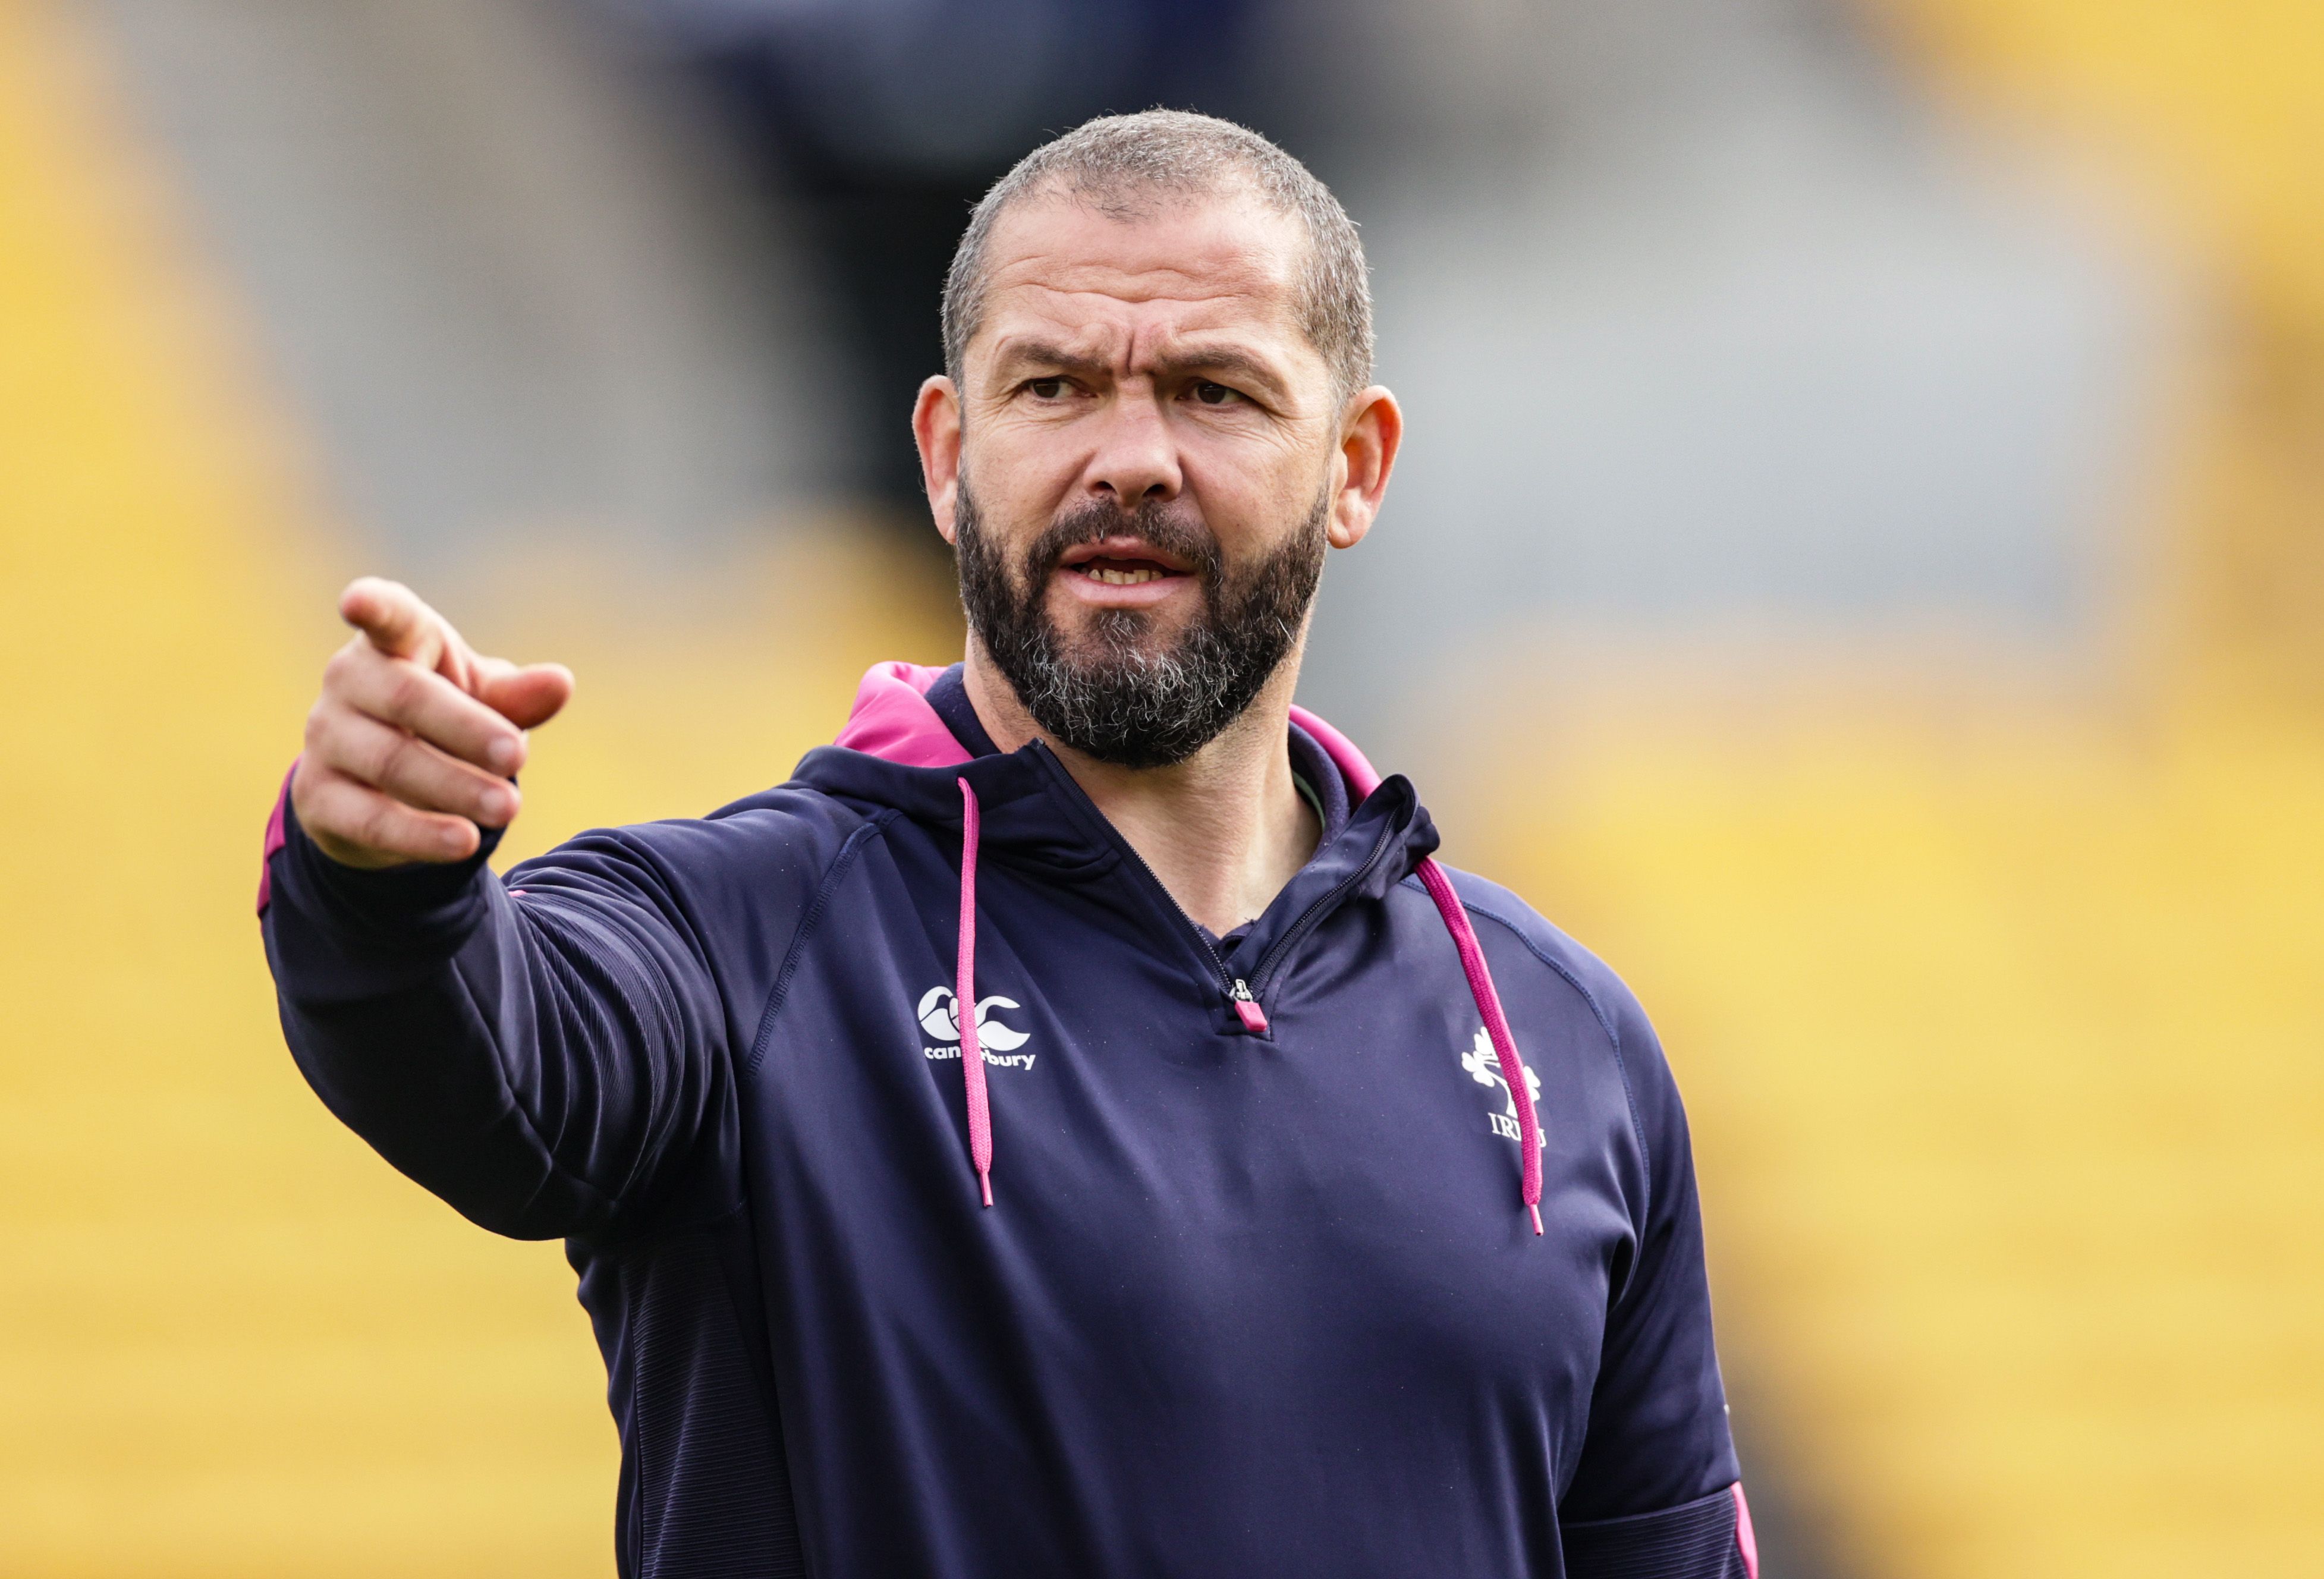 Andy farrell